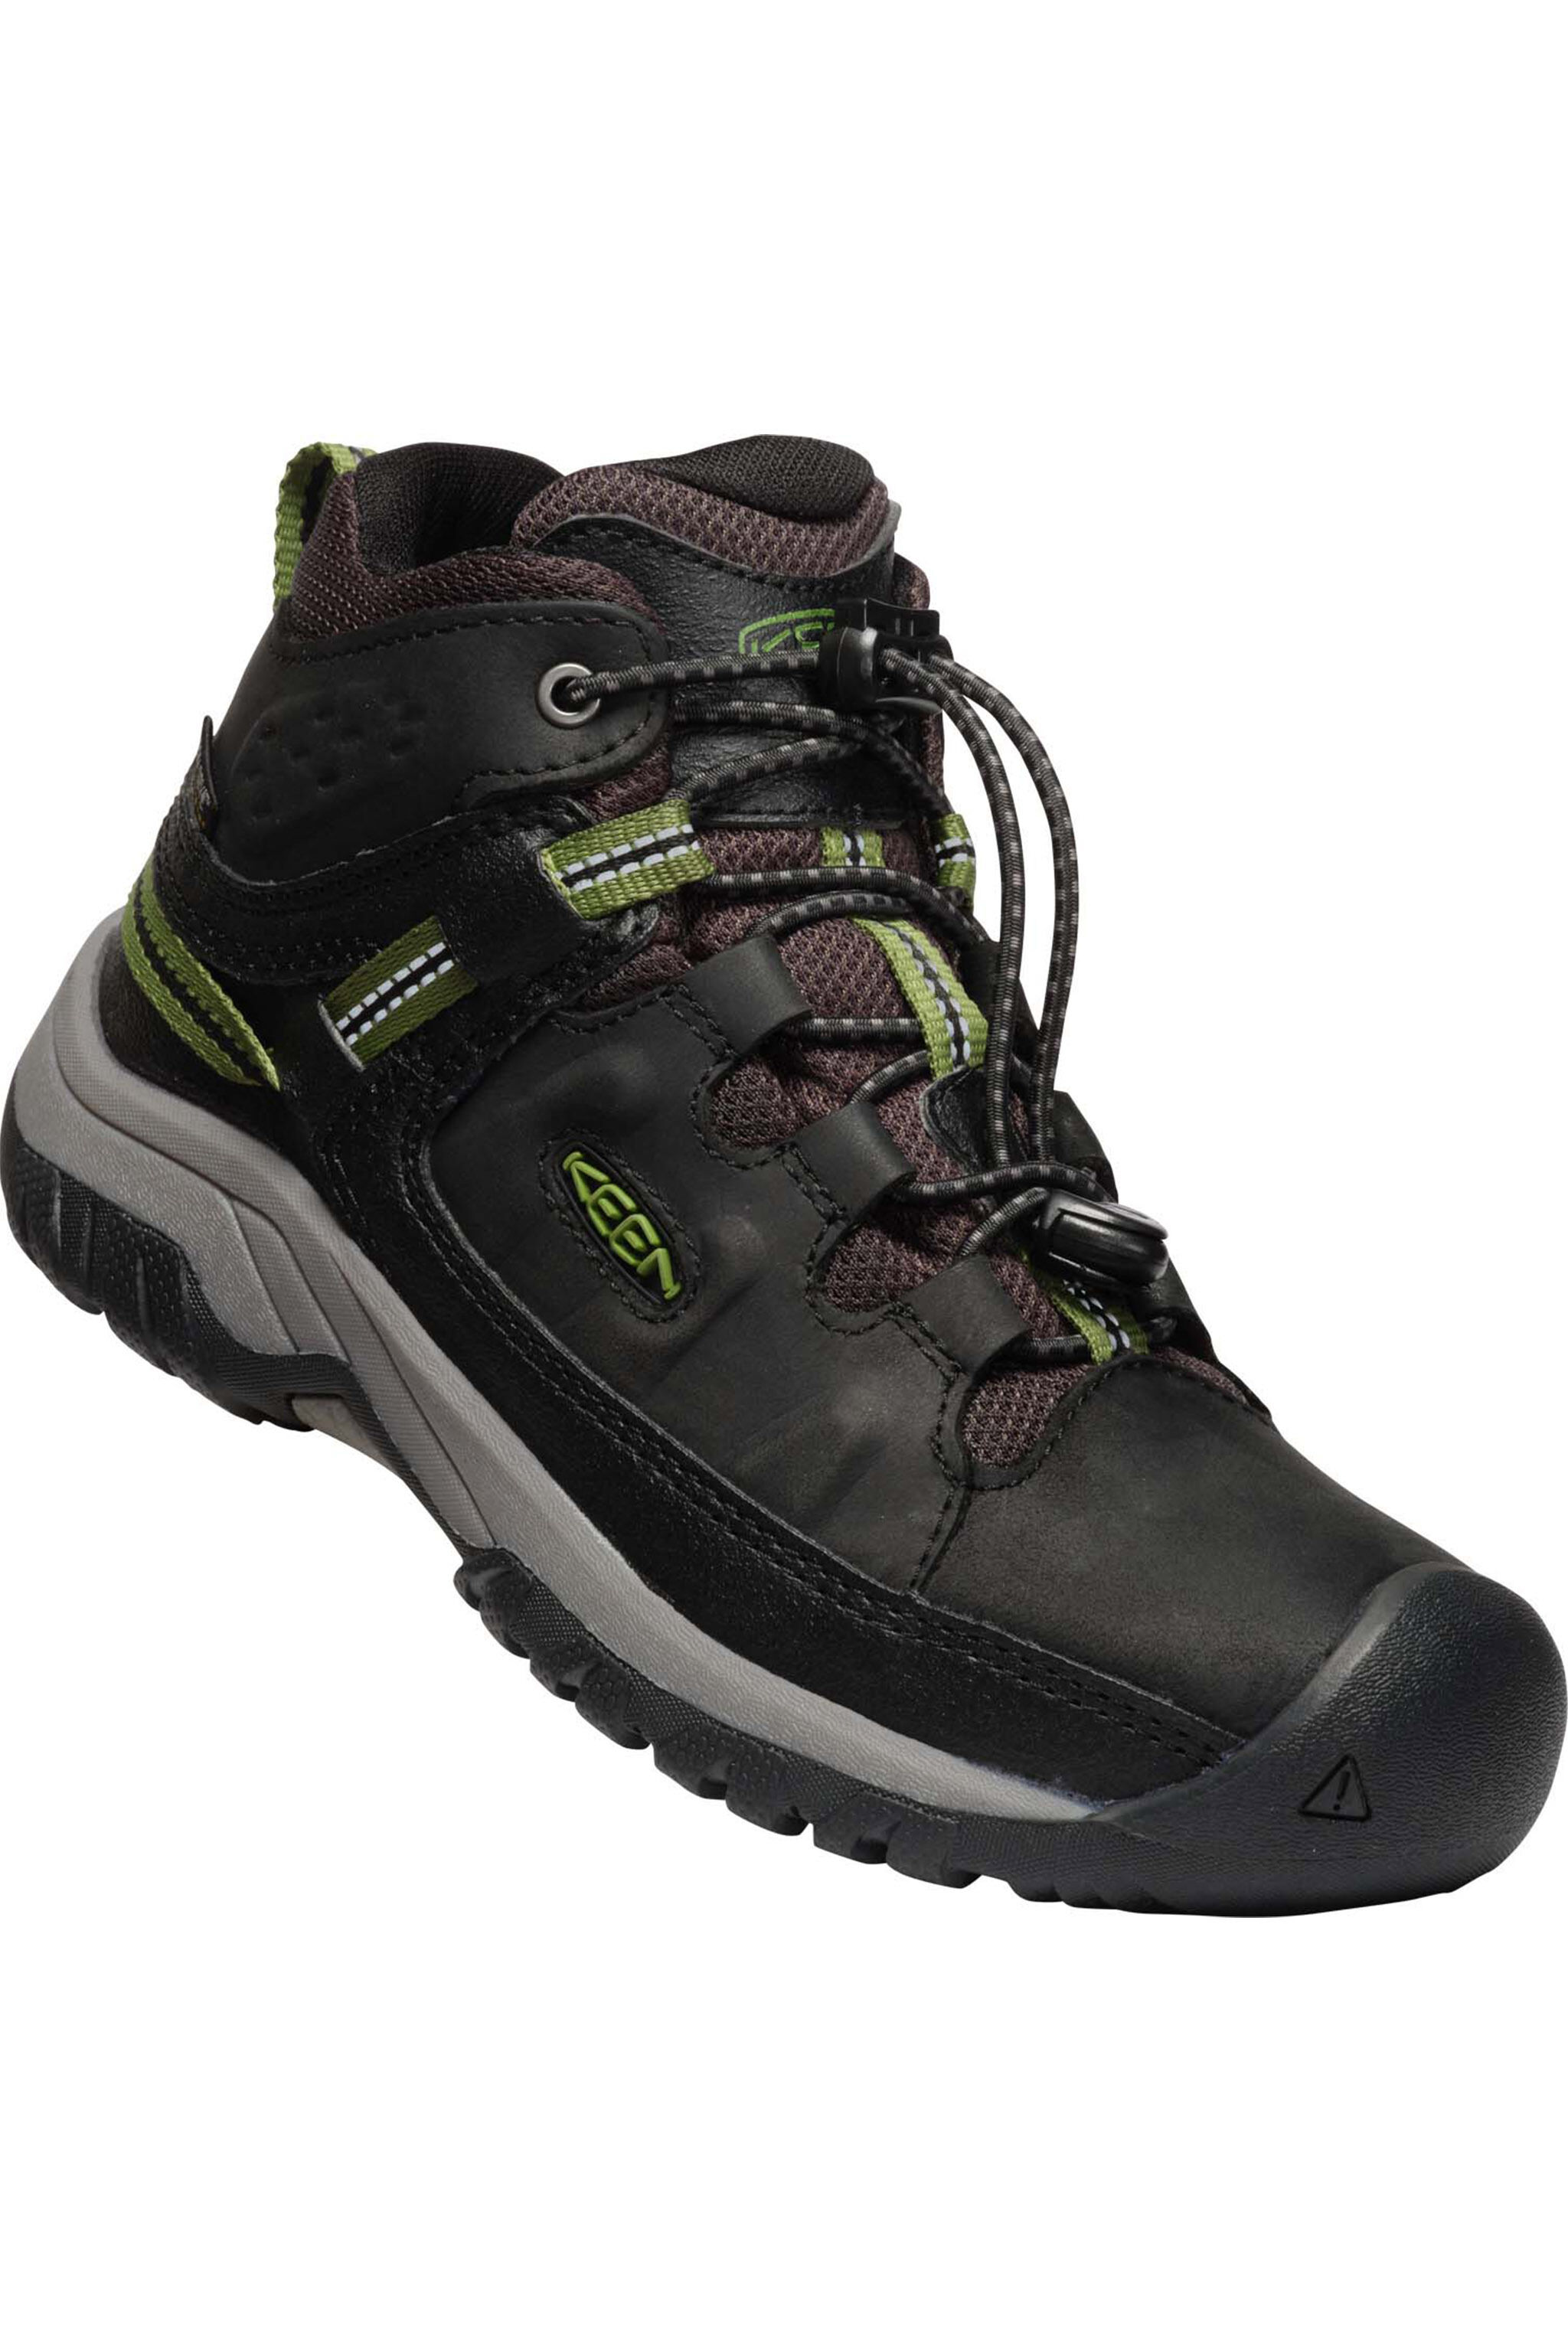 KEEN Targhee WP Hiking Boots — Youth 